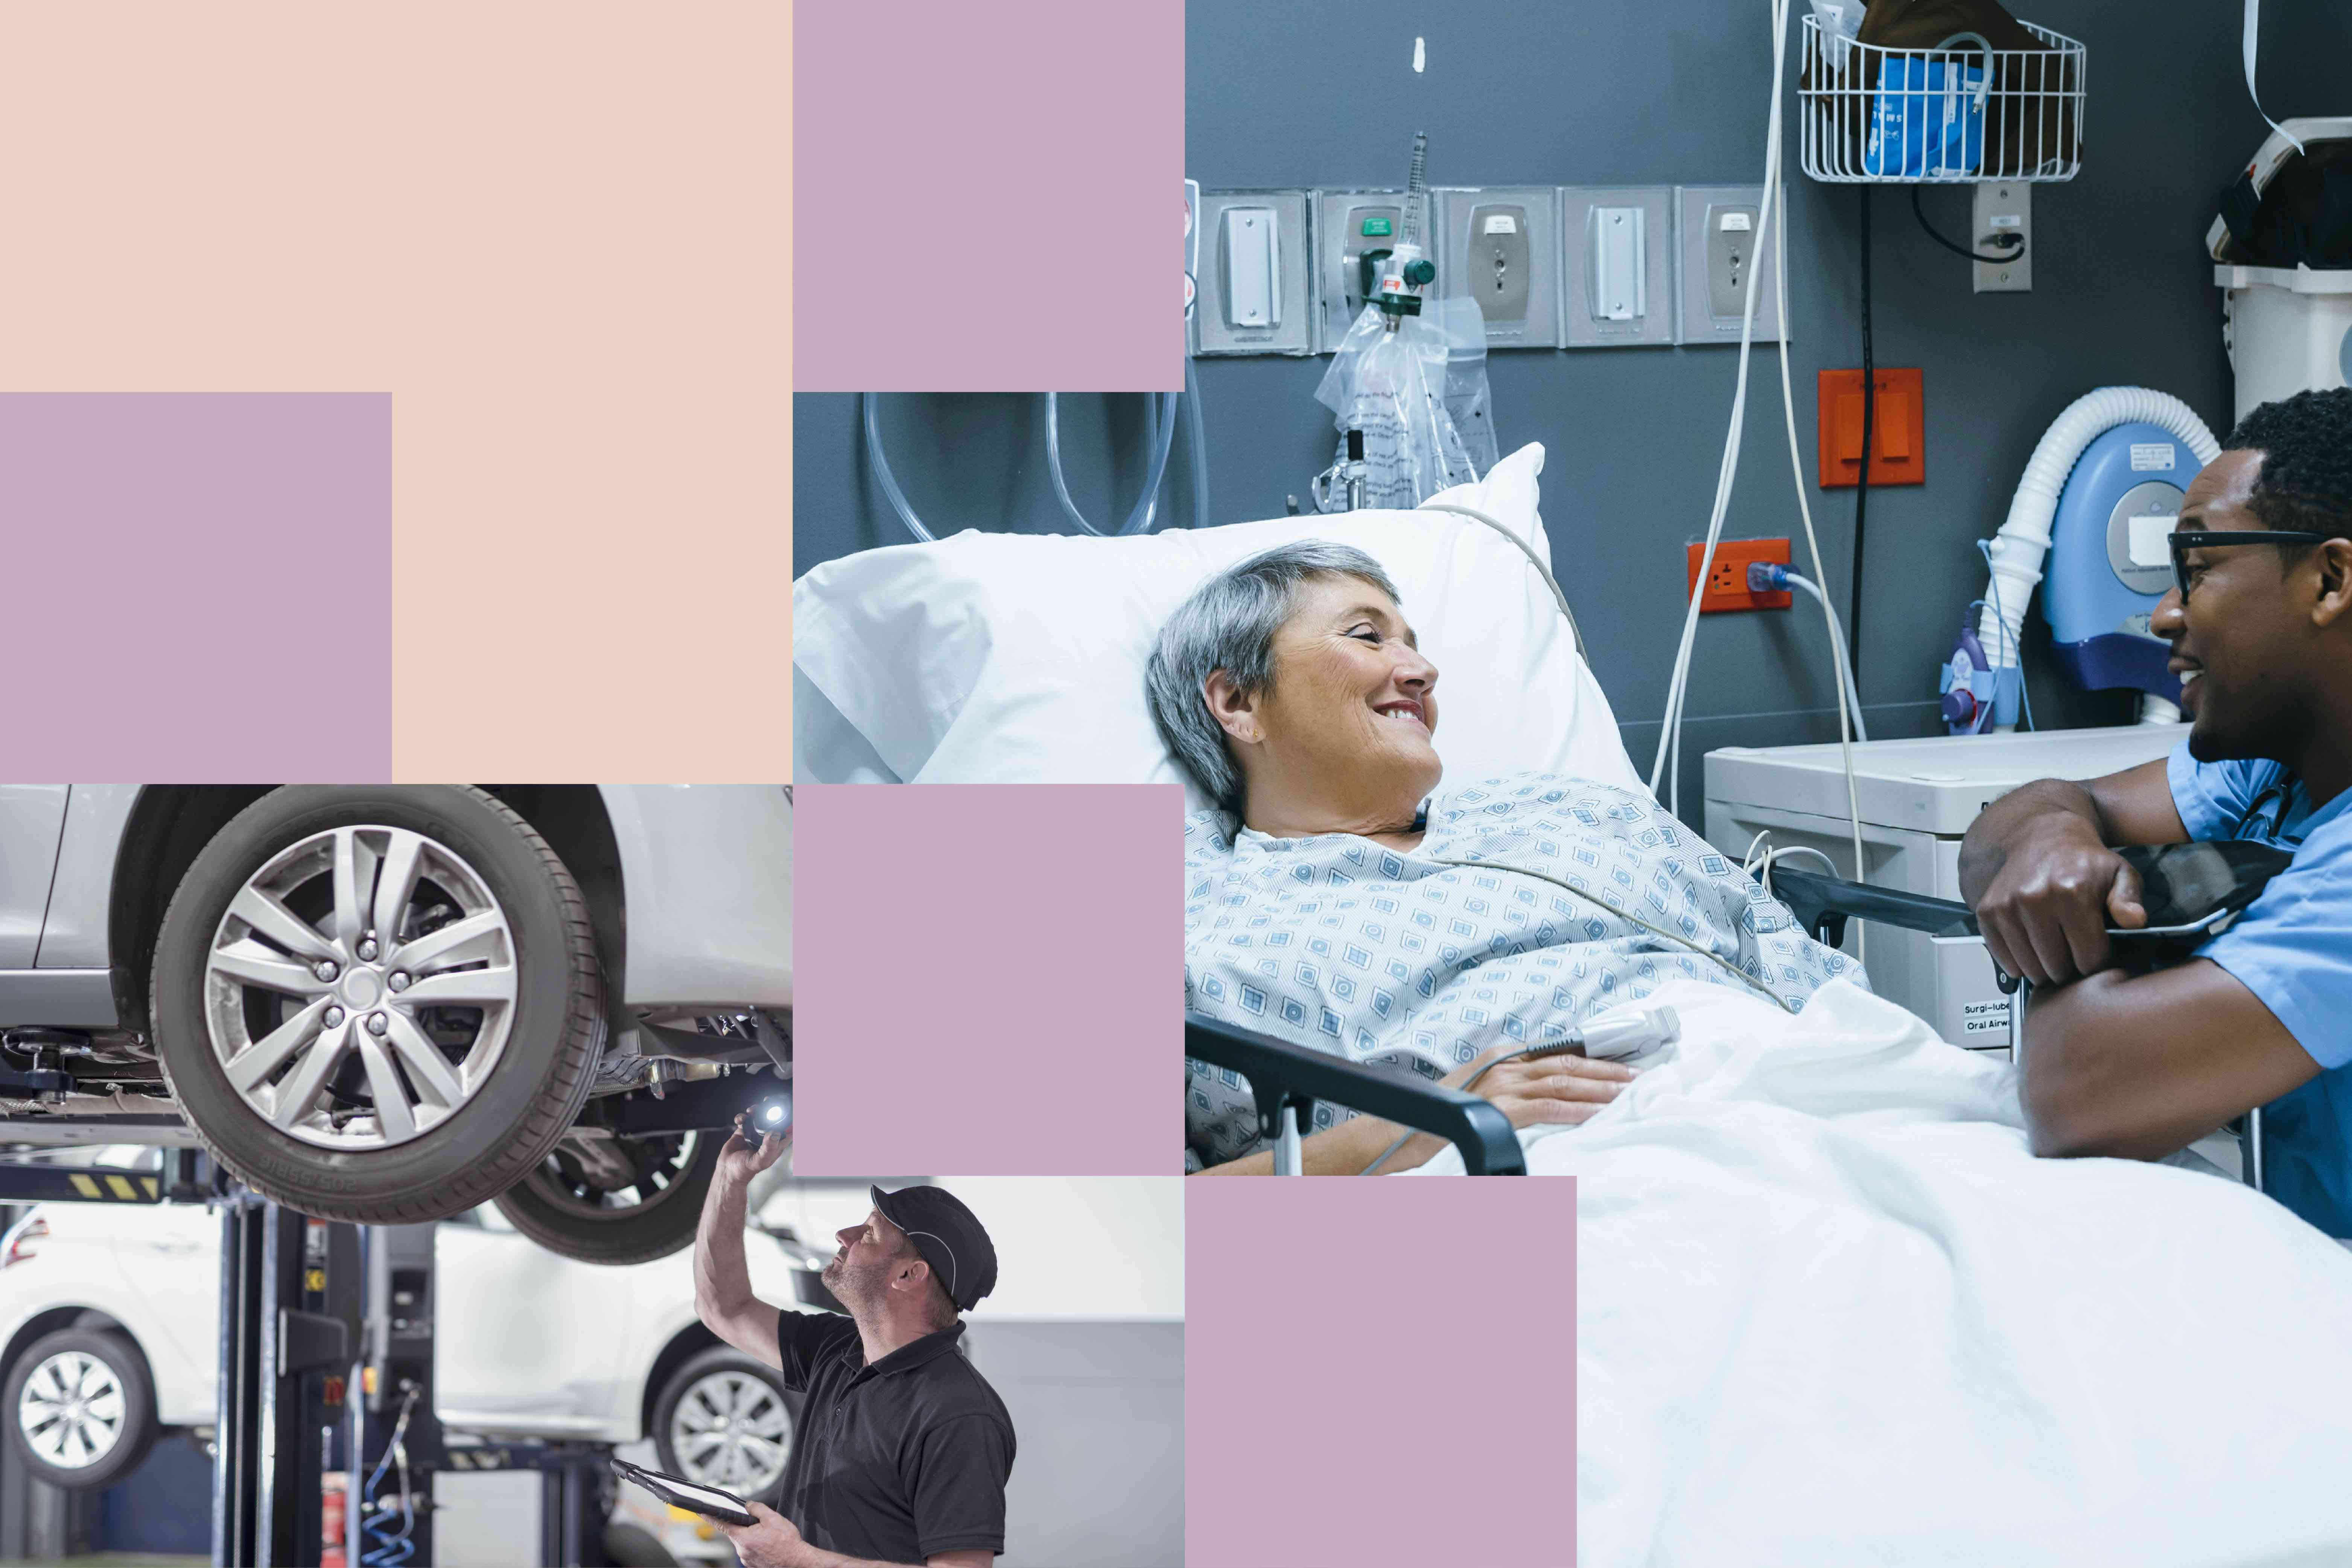 A collage shows a woman recovering in a hospital bed and another image shows a mechanic working on the underside of a car raised up on a garage lift.